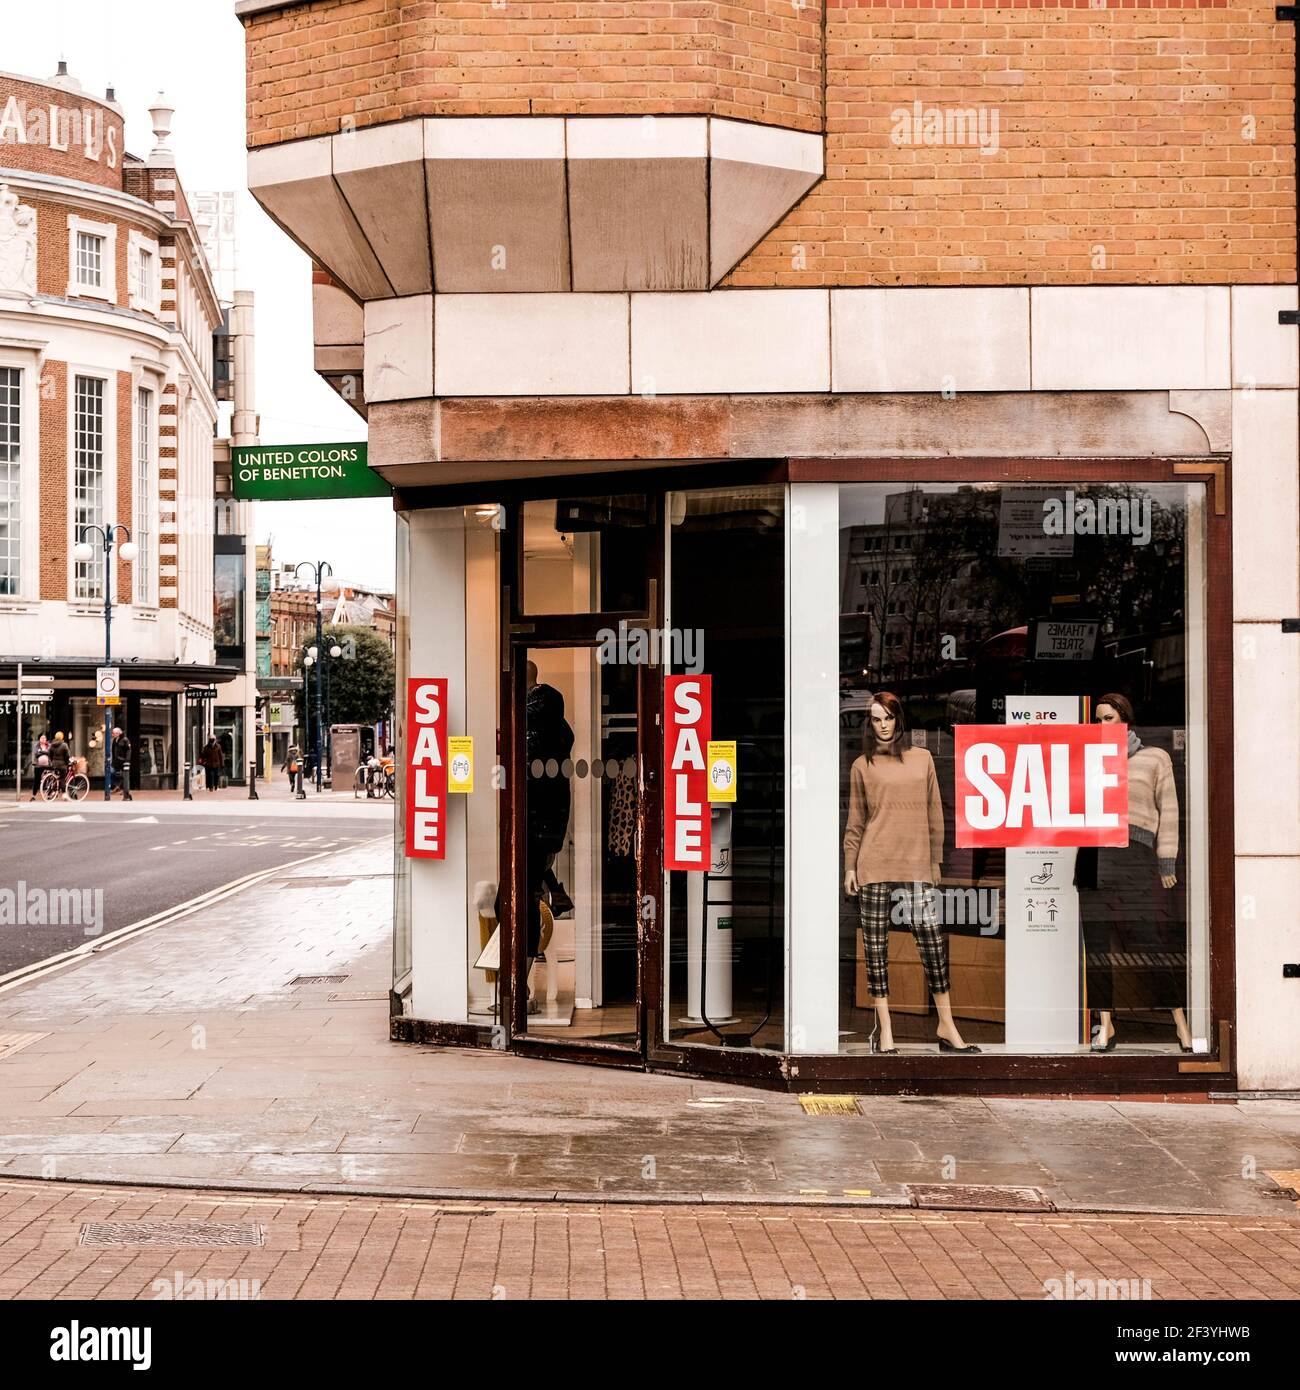 London UK, March 18 2021, United Colours Of Benetton Retail Shop Sale Signs  in Window Stock Photo - Alamy